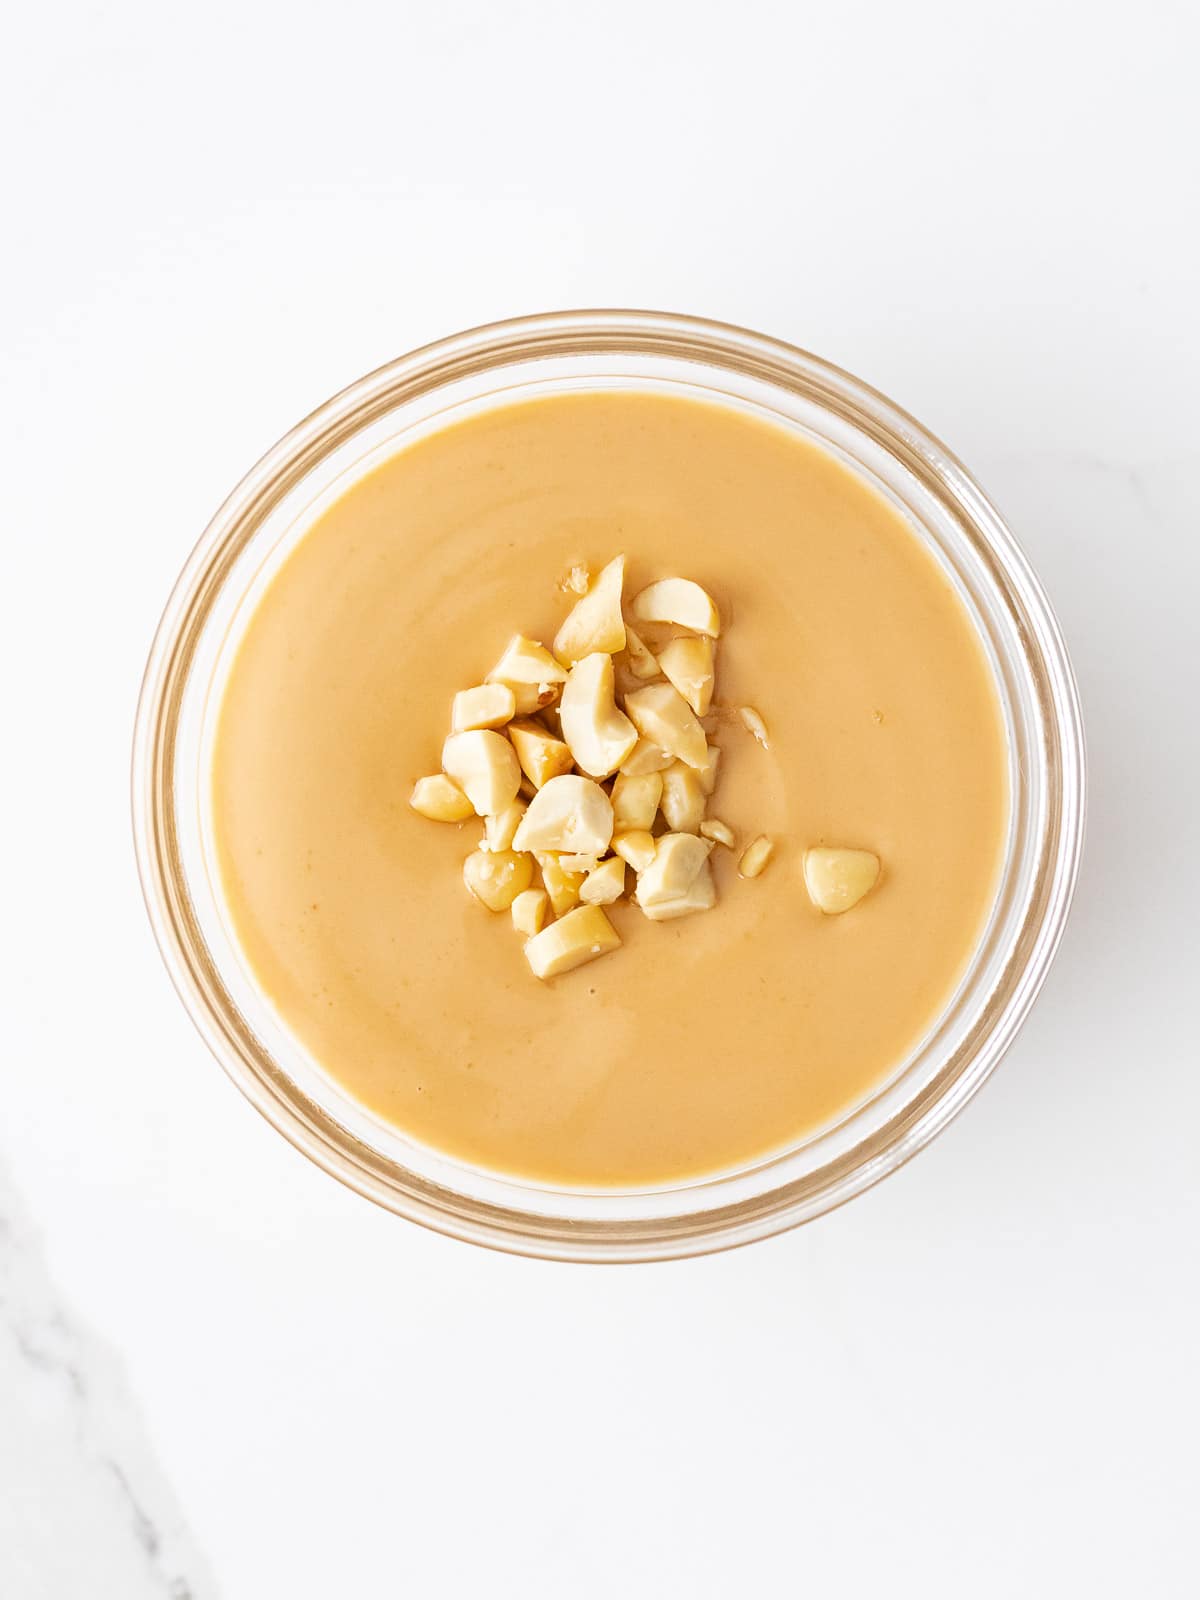 Vietnamese peanut sauce with crushed peanuts in a glass bowl